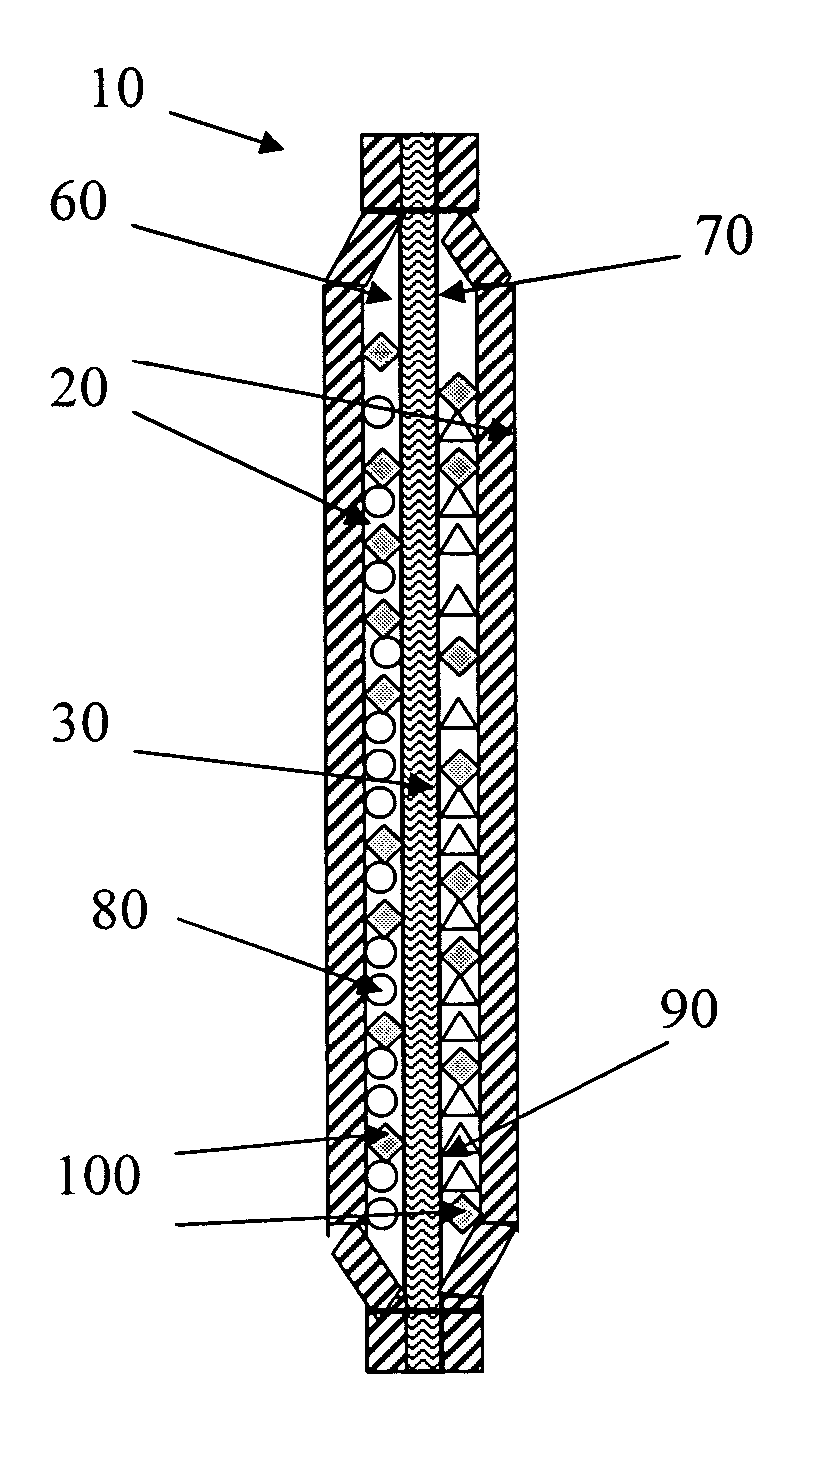 Device and methods for the production of chlorine dioxide vapor